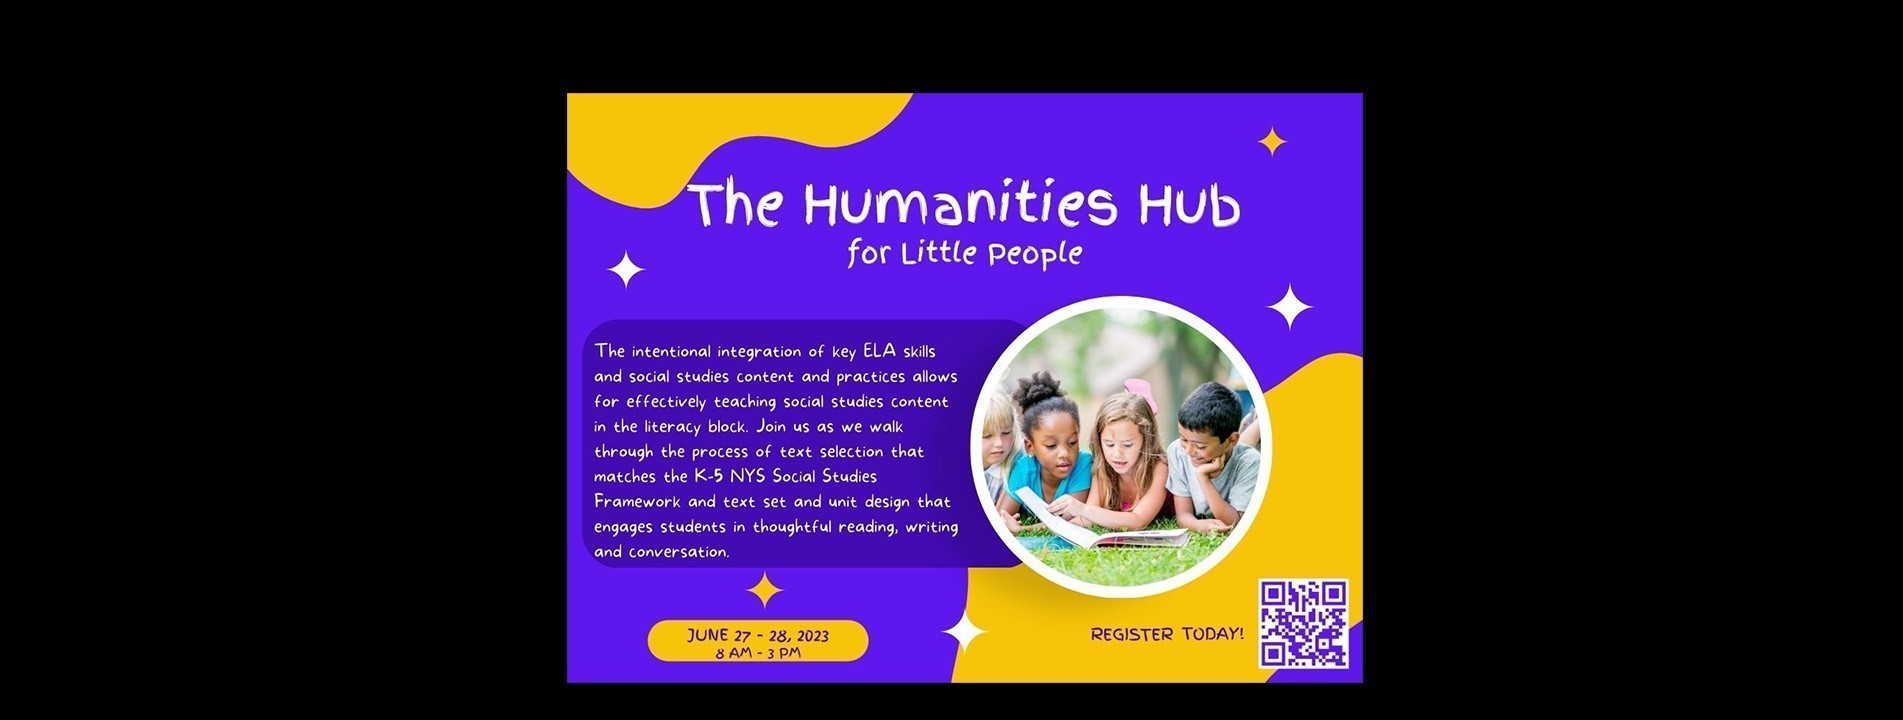 The Humanities Hub for Little People - June 27 - 28, 2023 from 8 am - 3 pm; Overview: The intentional integration of key ELA skills and social studies content and practices  allows for effectively teaching social studies content in the literacy block.  It also lets us target the skills and thinking moves that the disciplines share.   Join us as we walk through the process of text selection that matches the K-5 NYS Social Studies Framework and text set and unit design that engages students in thoughtful reading, writing and conversation.